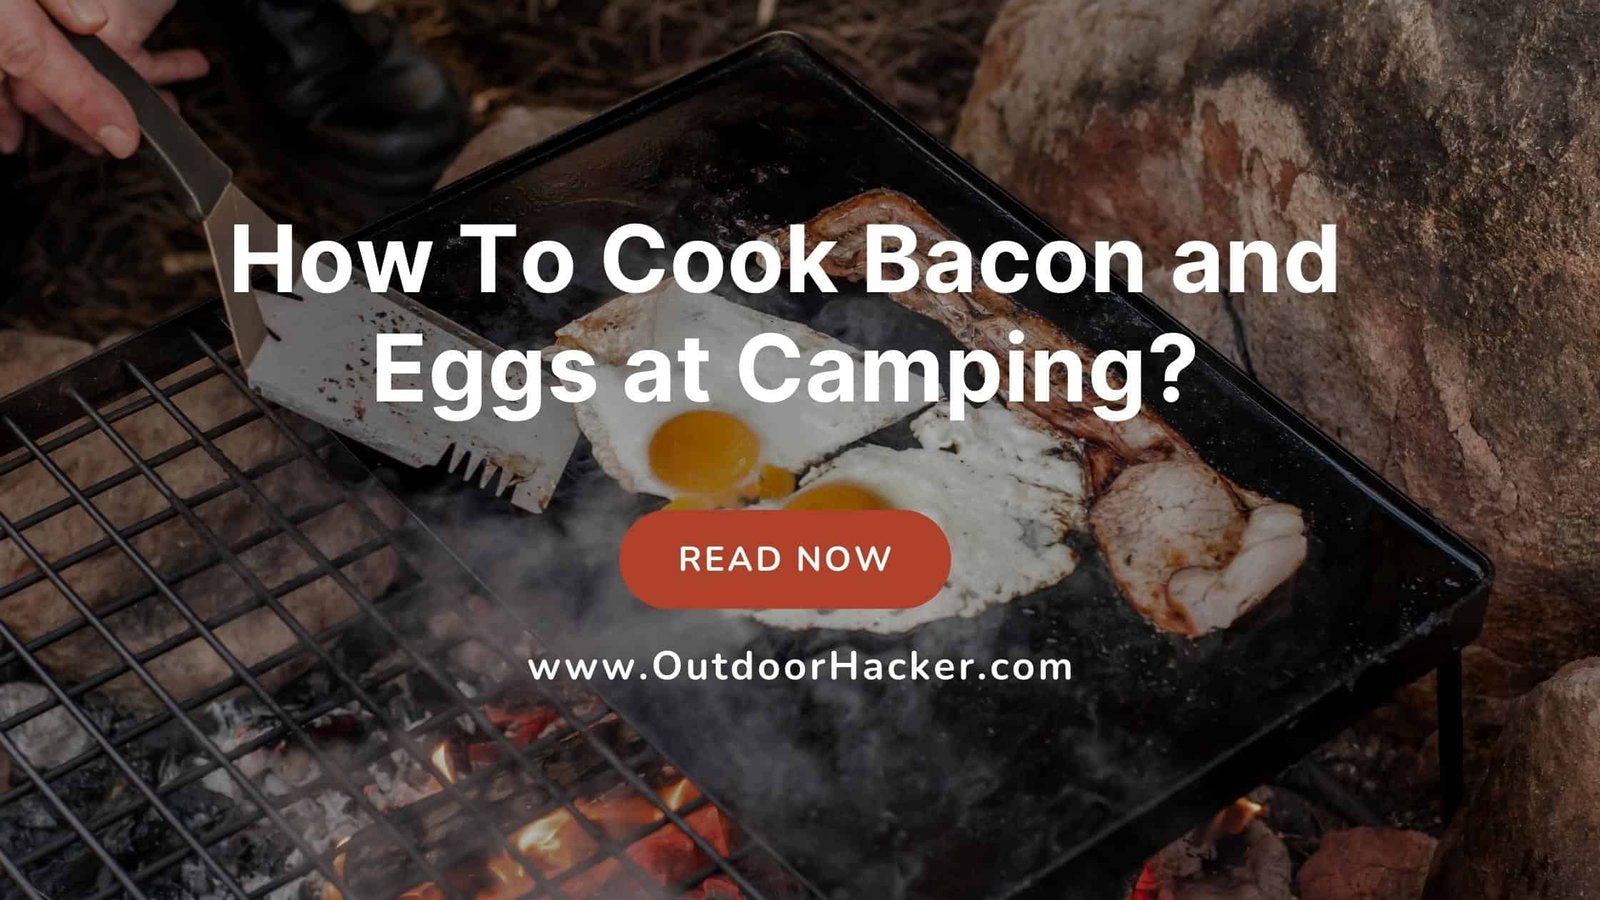 How To Cook Bacon and Eggs at Camping